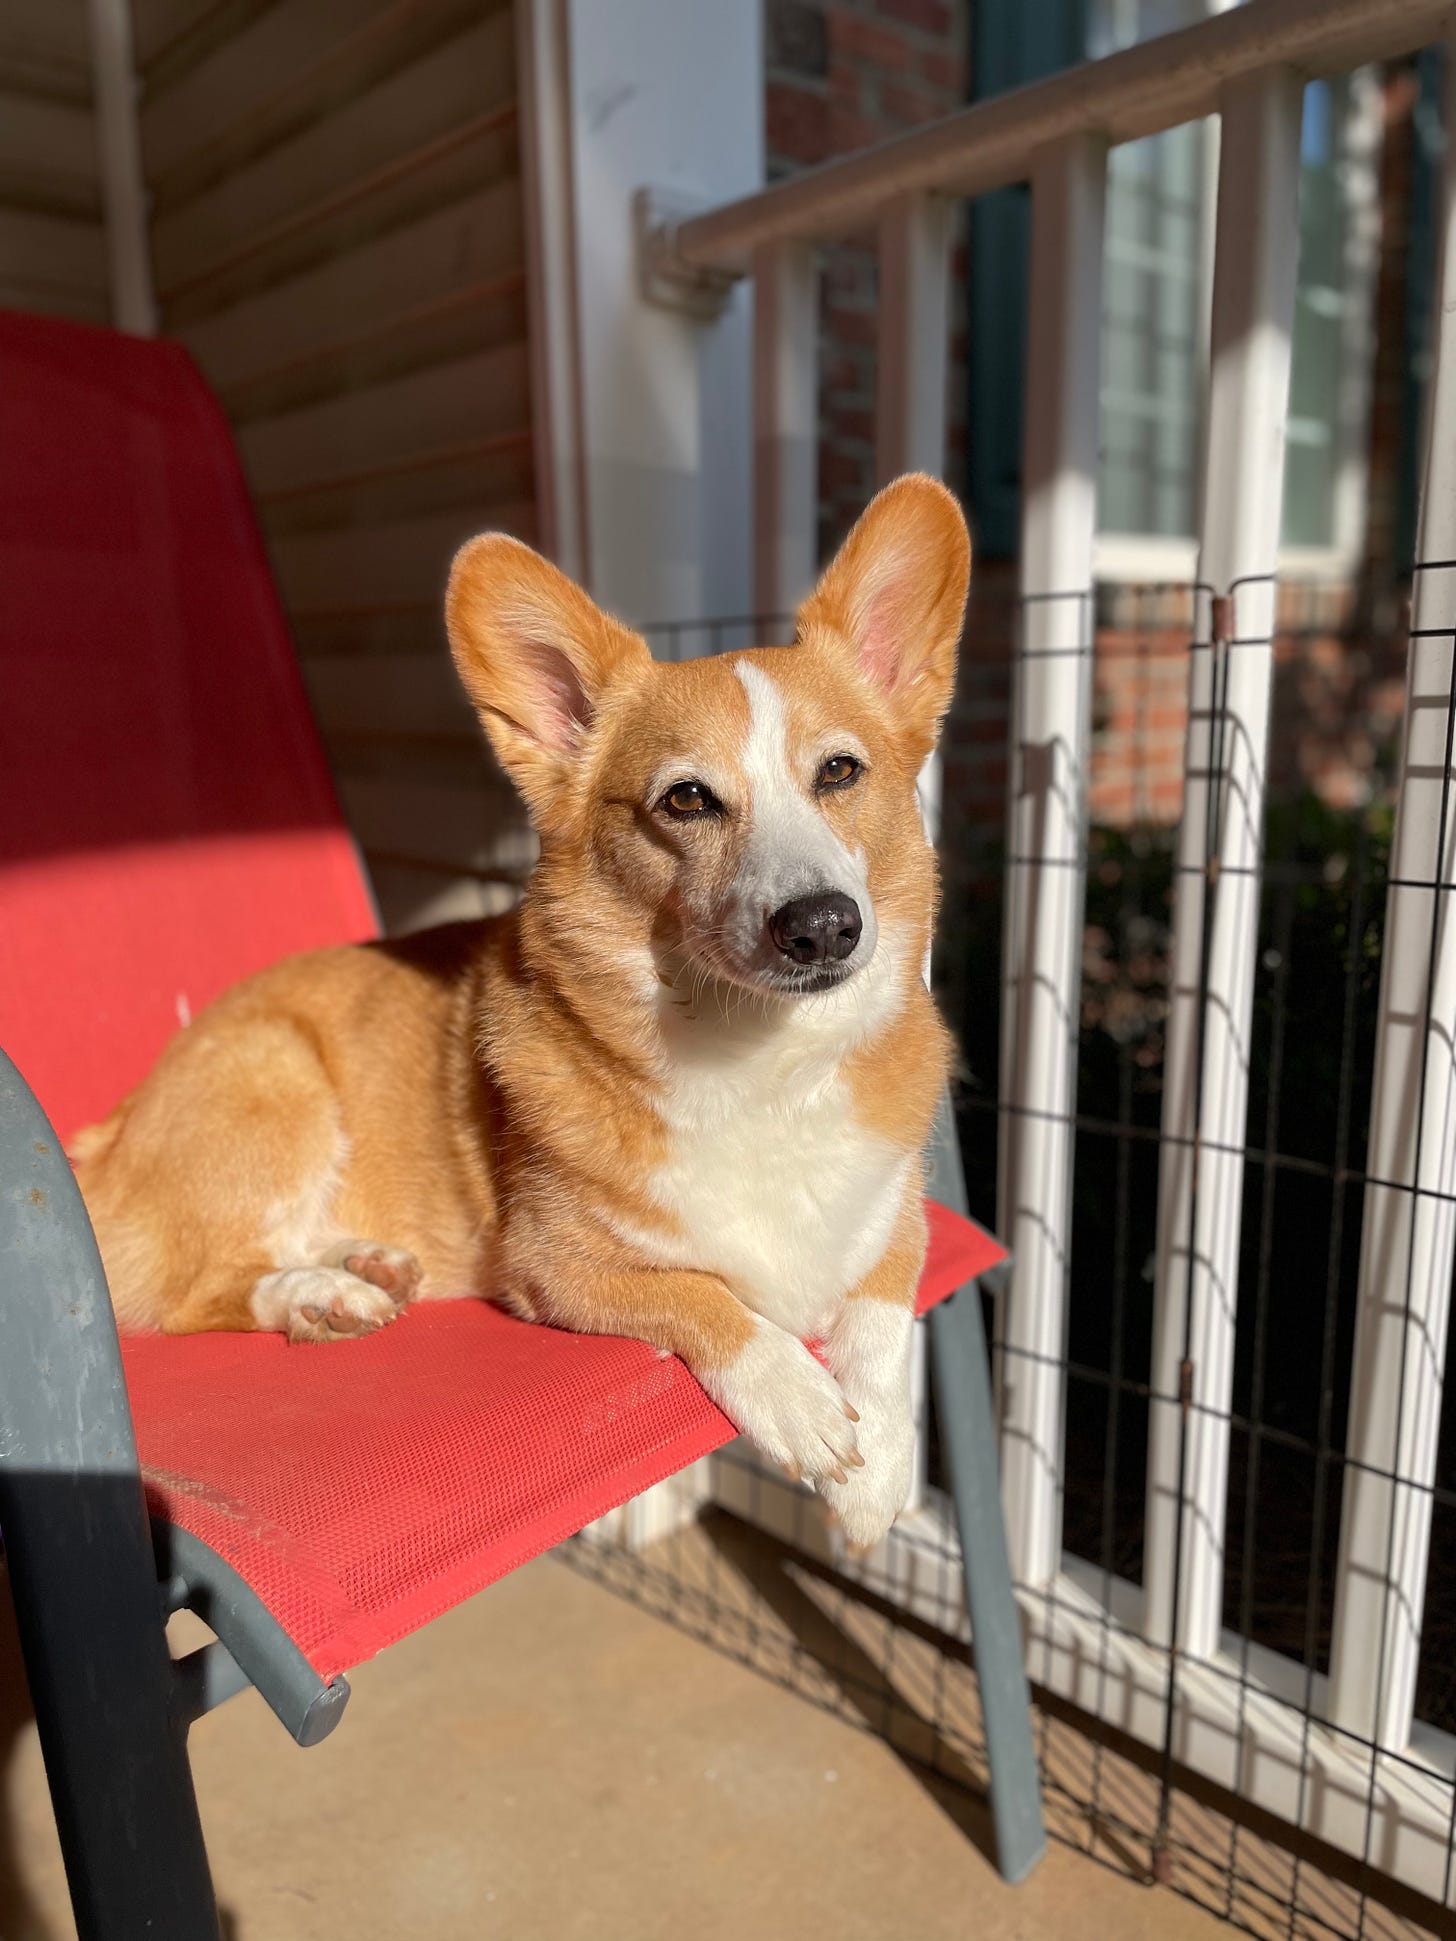 A photo of Dylan, a red and white Pembroke Welsh Corgi, sitting on the porch in the sun. He looks very regal in his favorite outdoor chair.